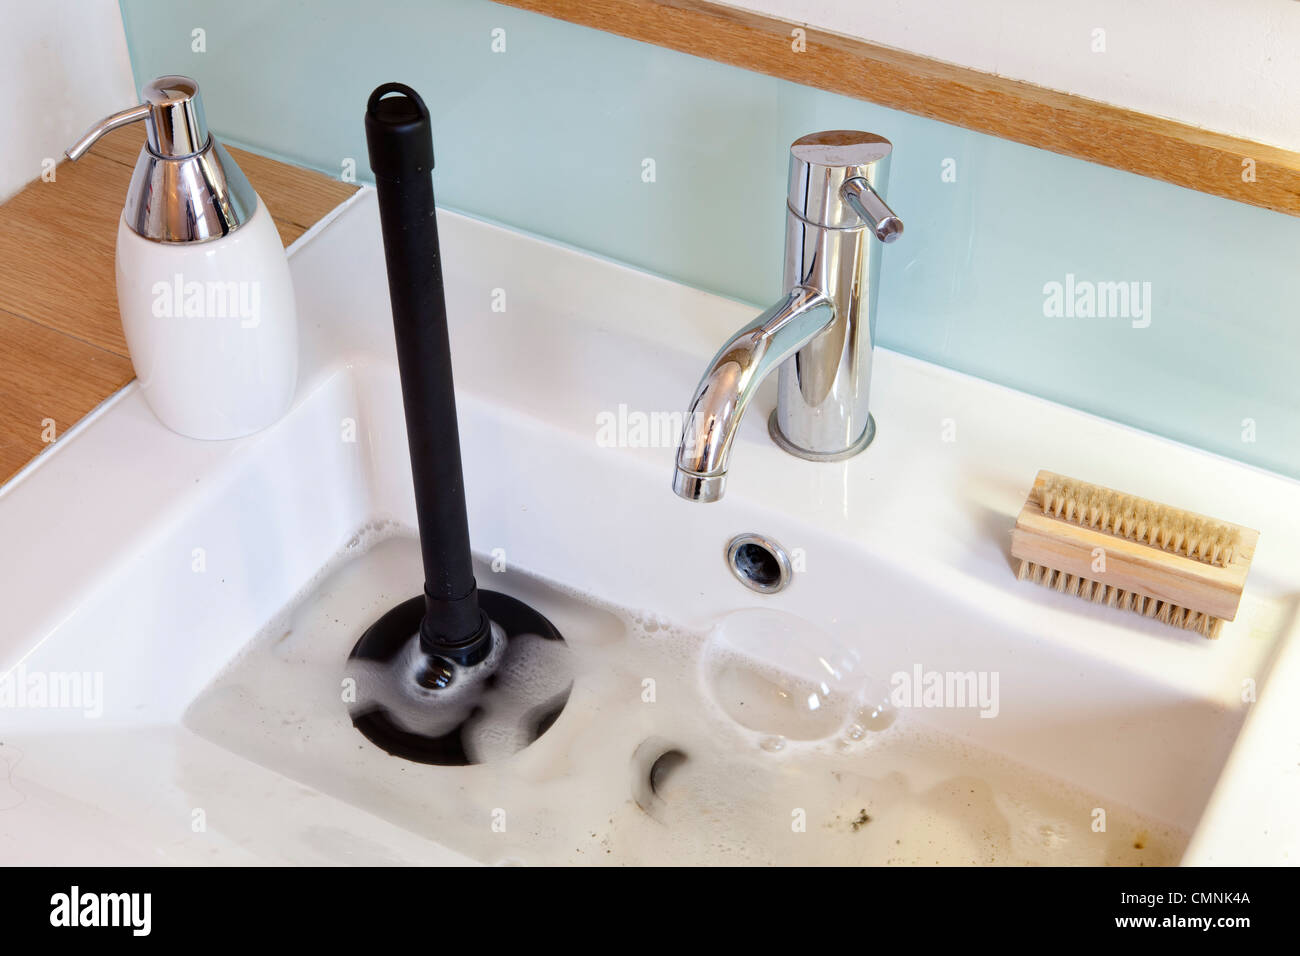 Blocked bathroom sink with plunger Stock Photo